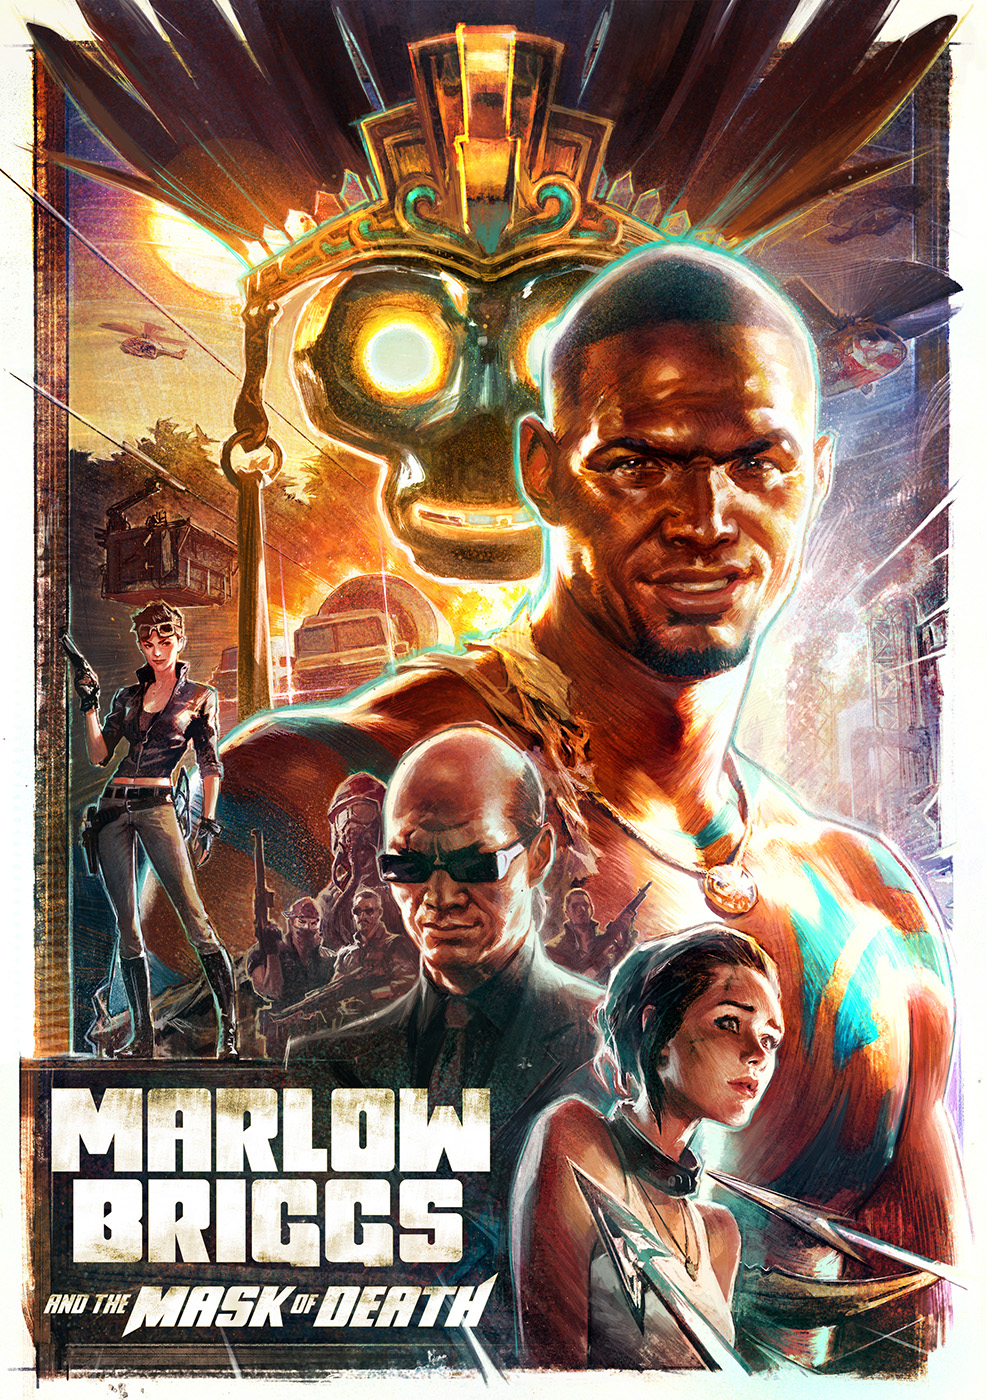 "Marlow Briggs and the Mask of Death"